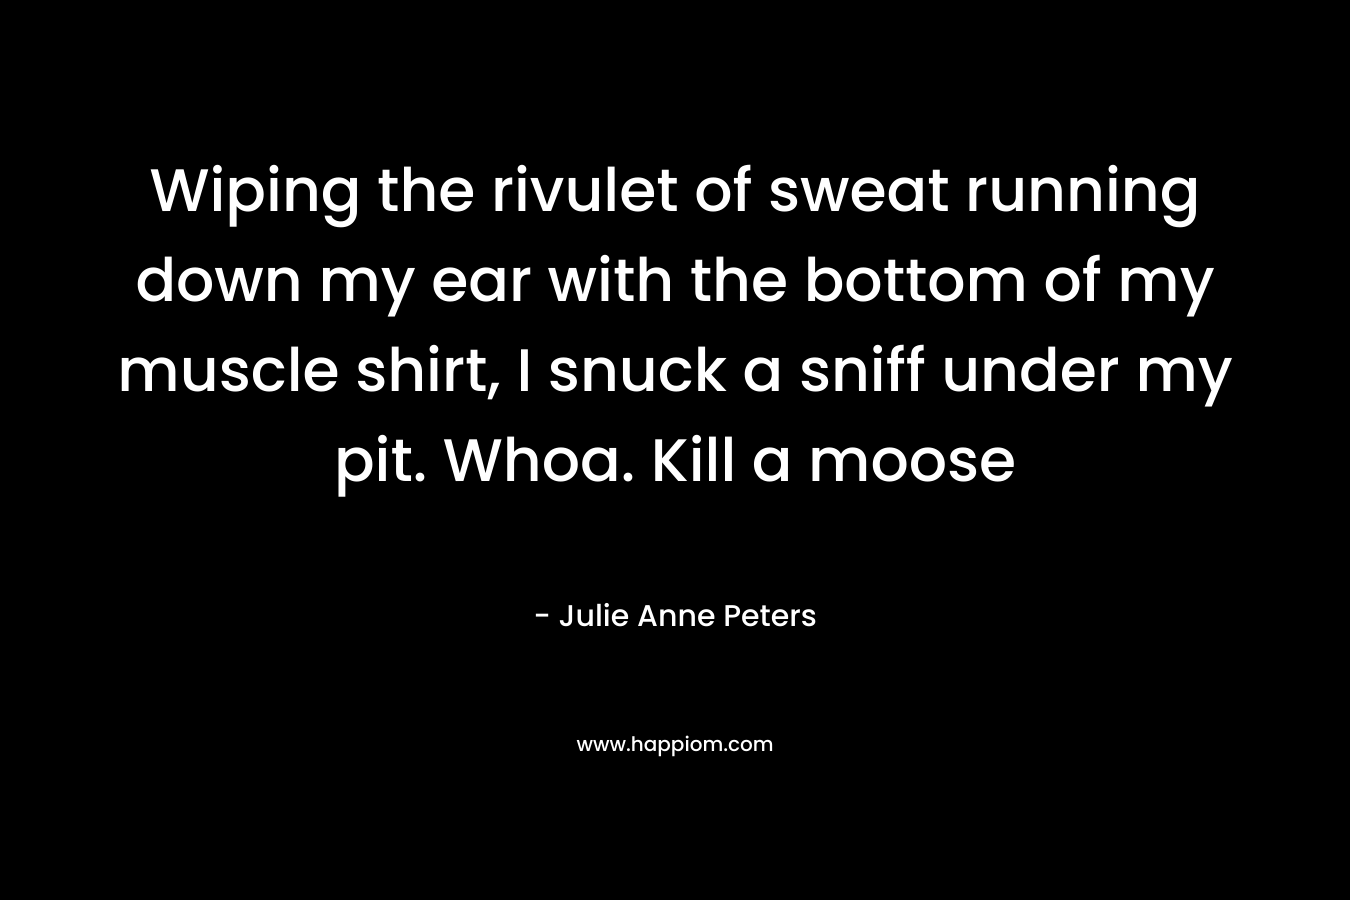 Wiping the rivulet of sweat running down my ear with the bottom of my muscle shirt, I snuck a sniff under my pit. Whoa. Kill a moose